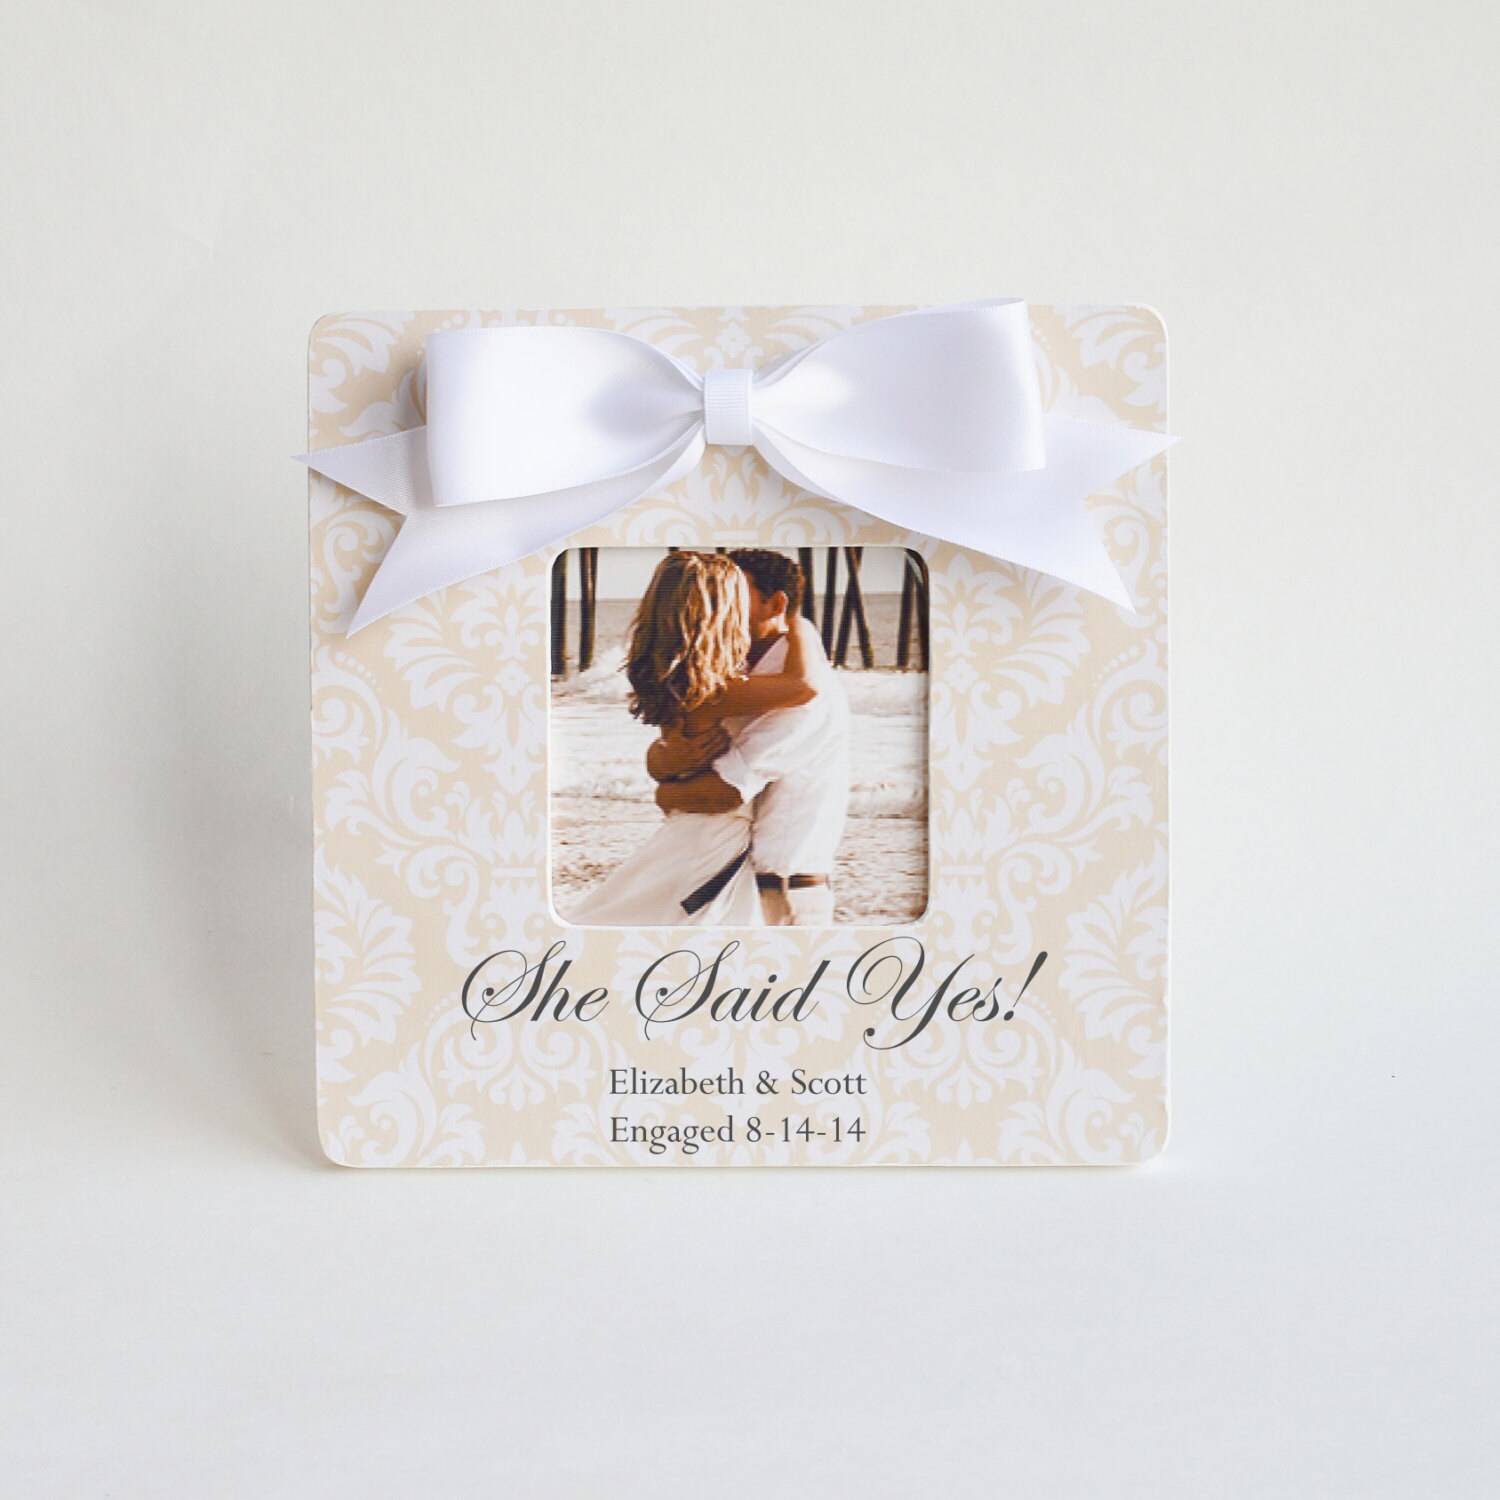 She Said Yes Engagement Picture Frame Gift by